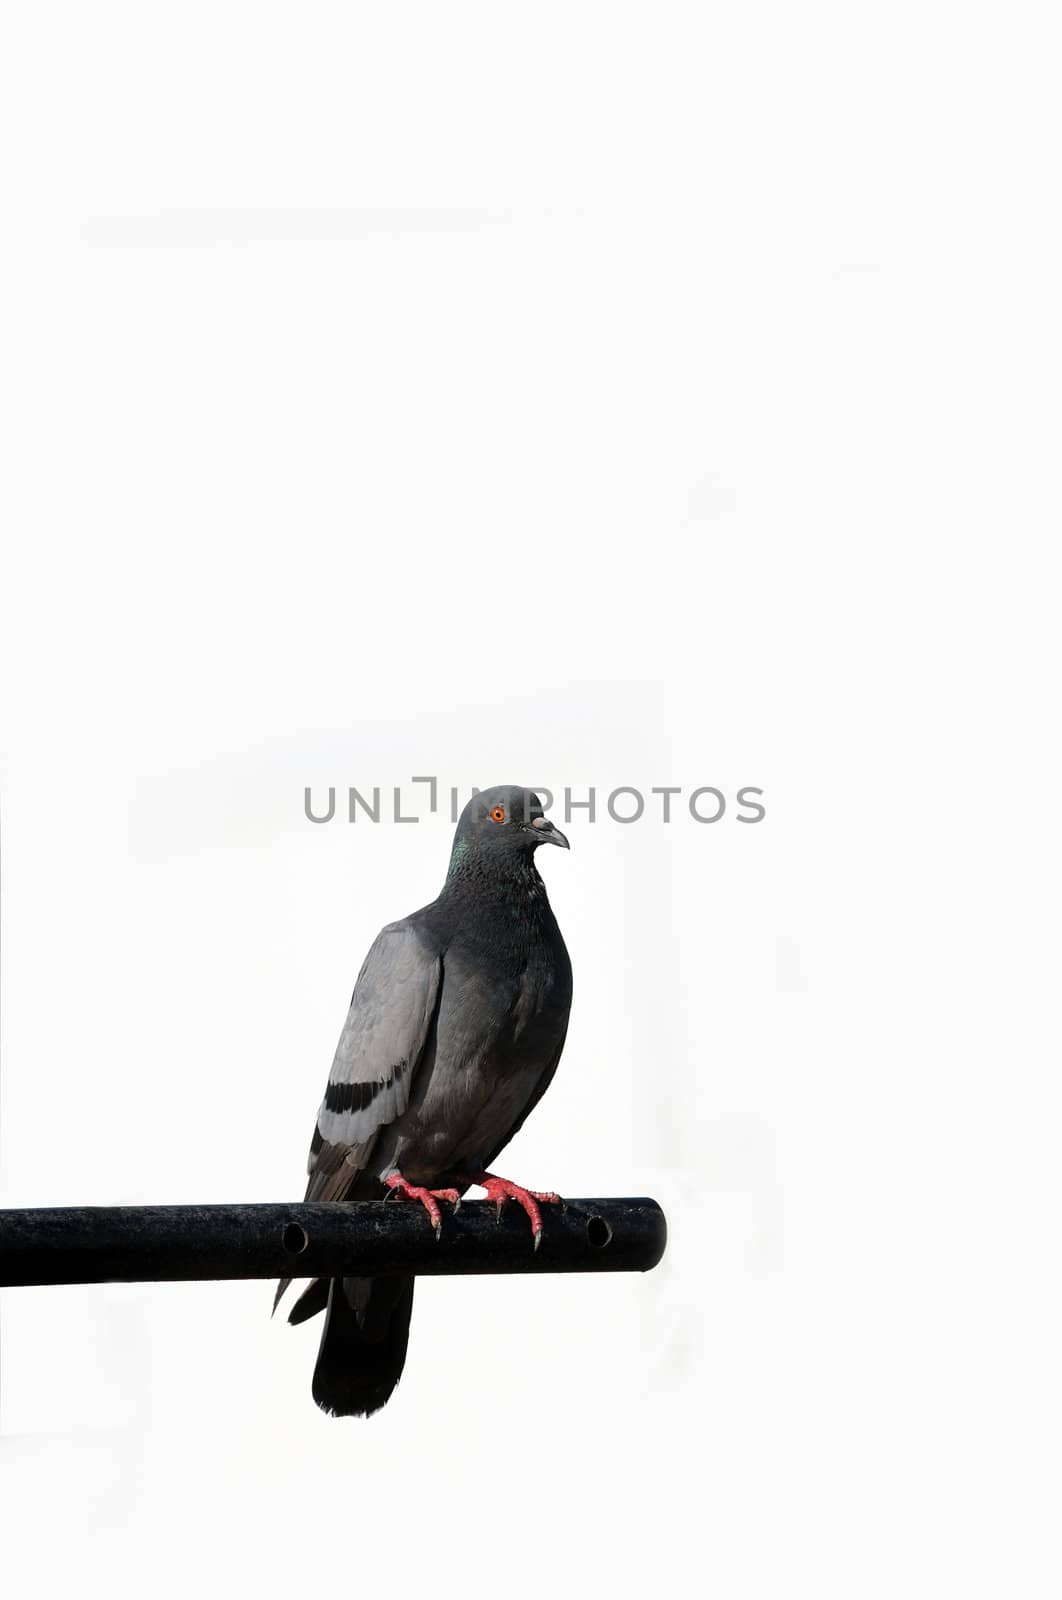 A grey rock pigeon isplated on white background